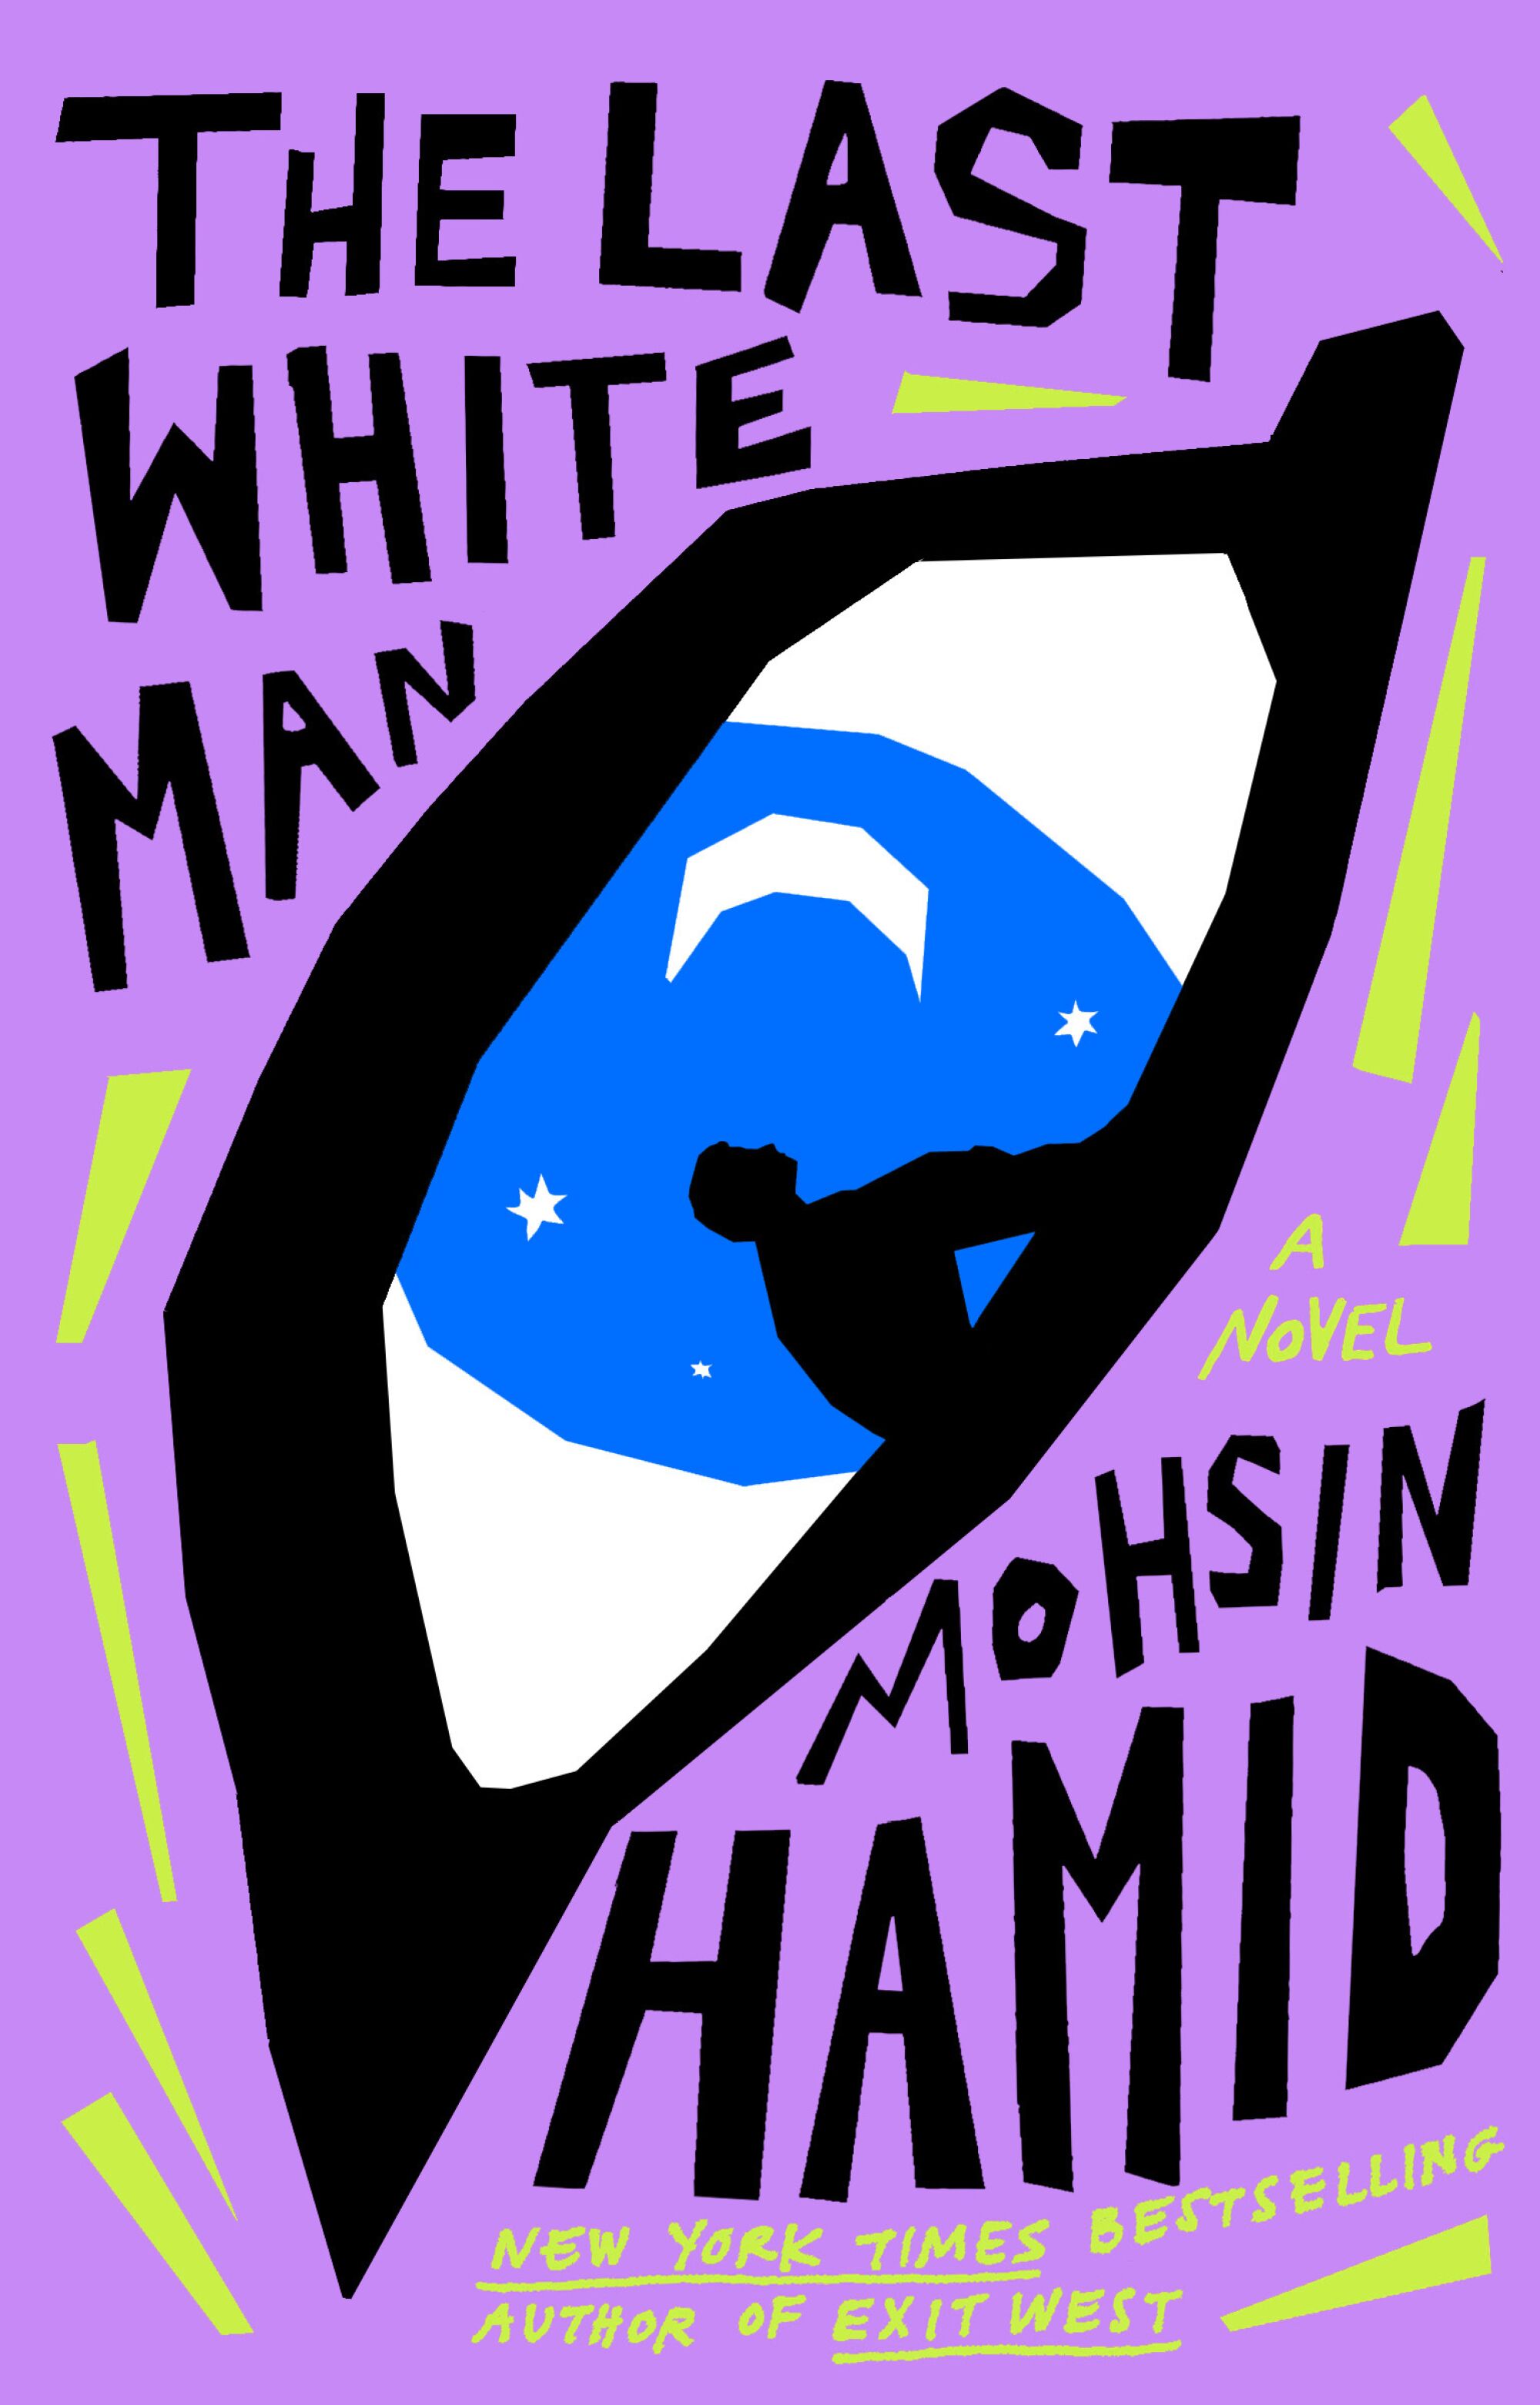 illustration of an eye on a purple background on the cover of "The Last White Man" by Mohsin Hamid